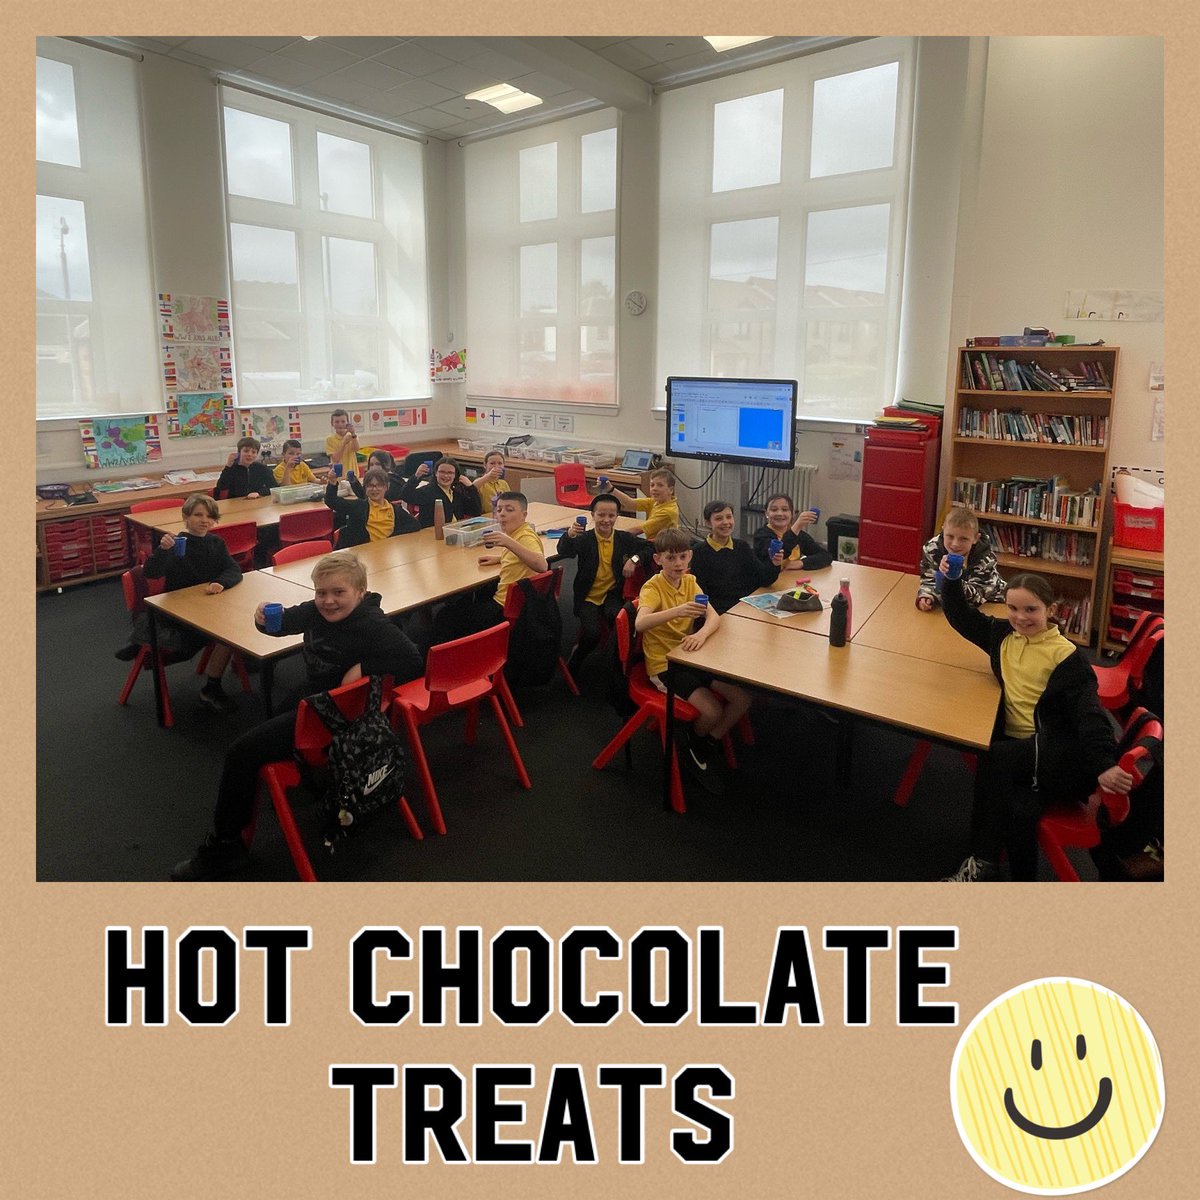 I was in class with P6.had a Health and Well-Being week which has been so much fun. I highly recommend it. Good for everyone’s mental health. Brace yourself for photos and videos. Mrs Lee popped in this morning to treat us all to hot chocolate ☕️ @muiredgeprimary